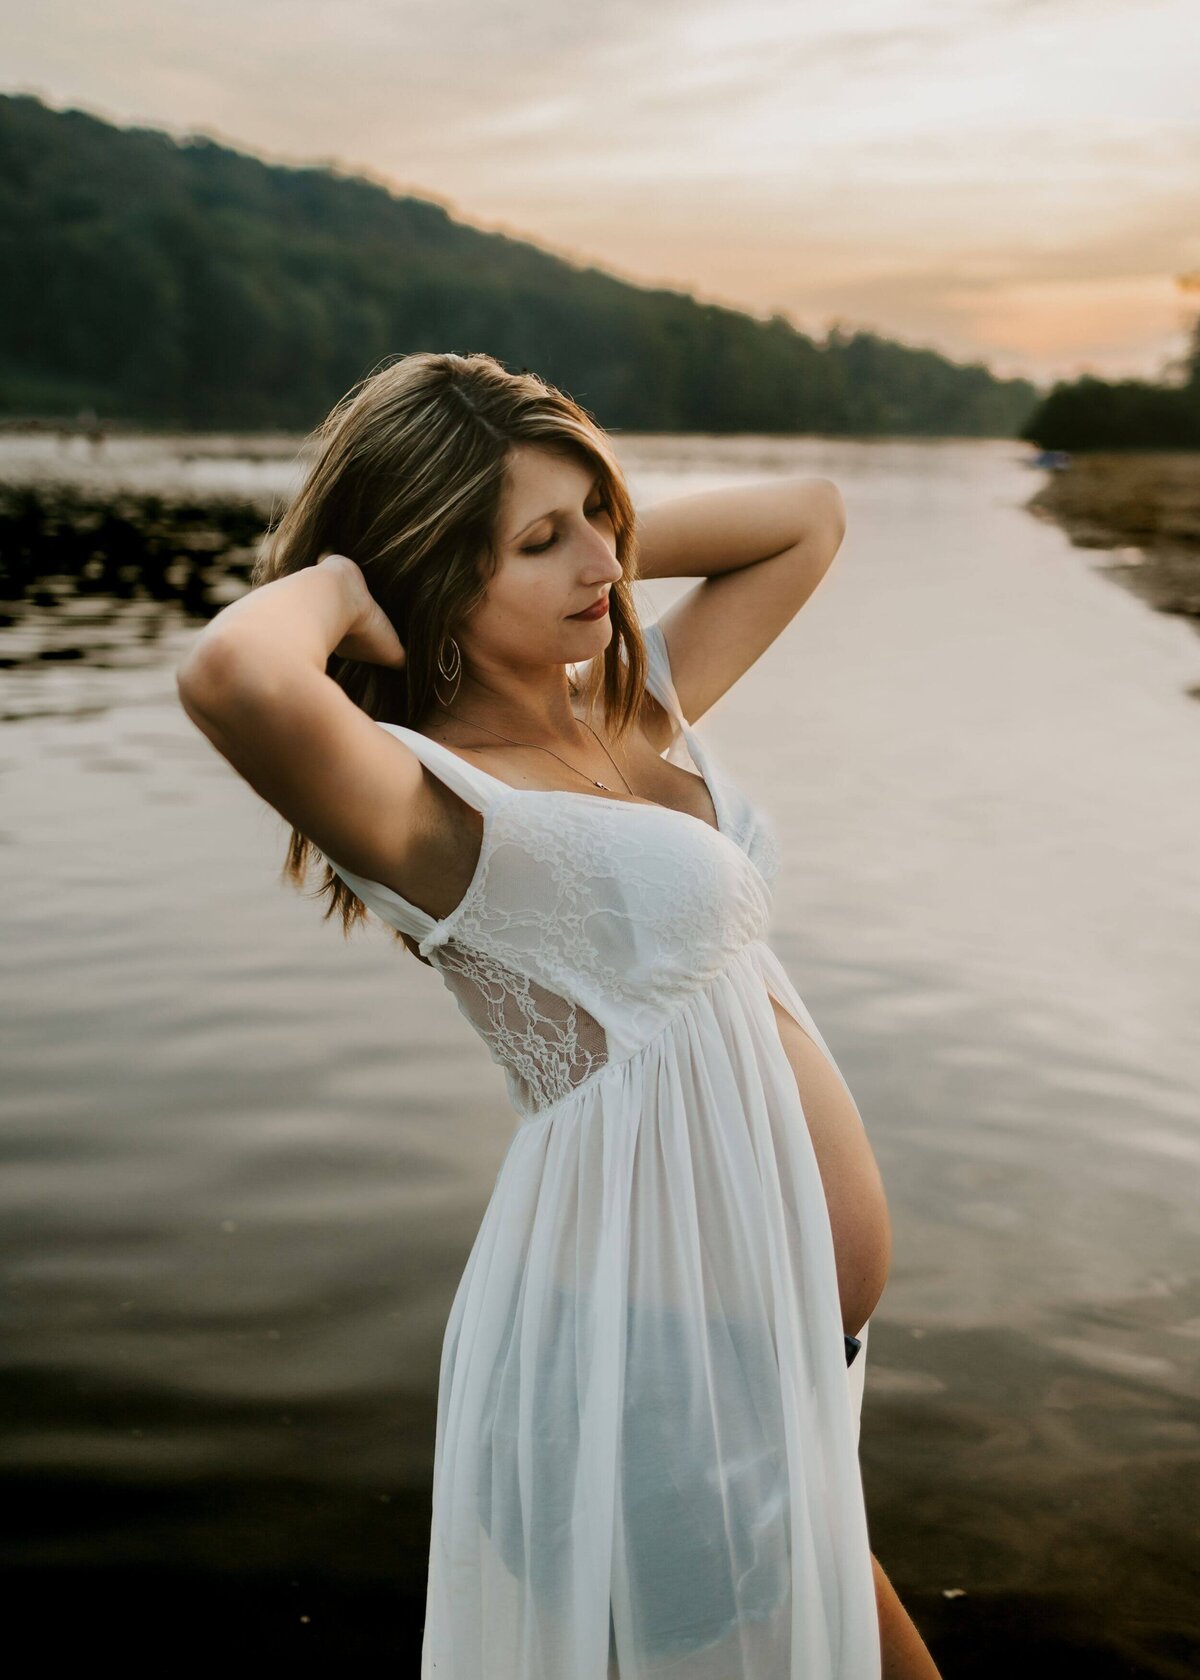 A pregnant woman in a white dress posing by the water captured by a Pittsburgh maternity photographer.